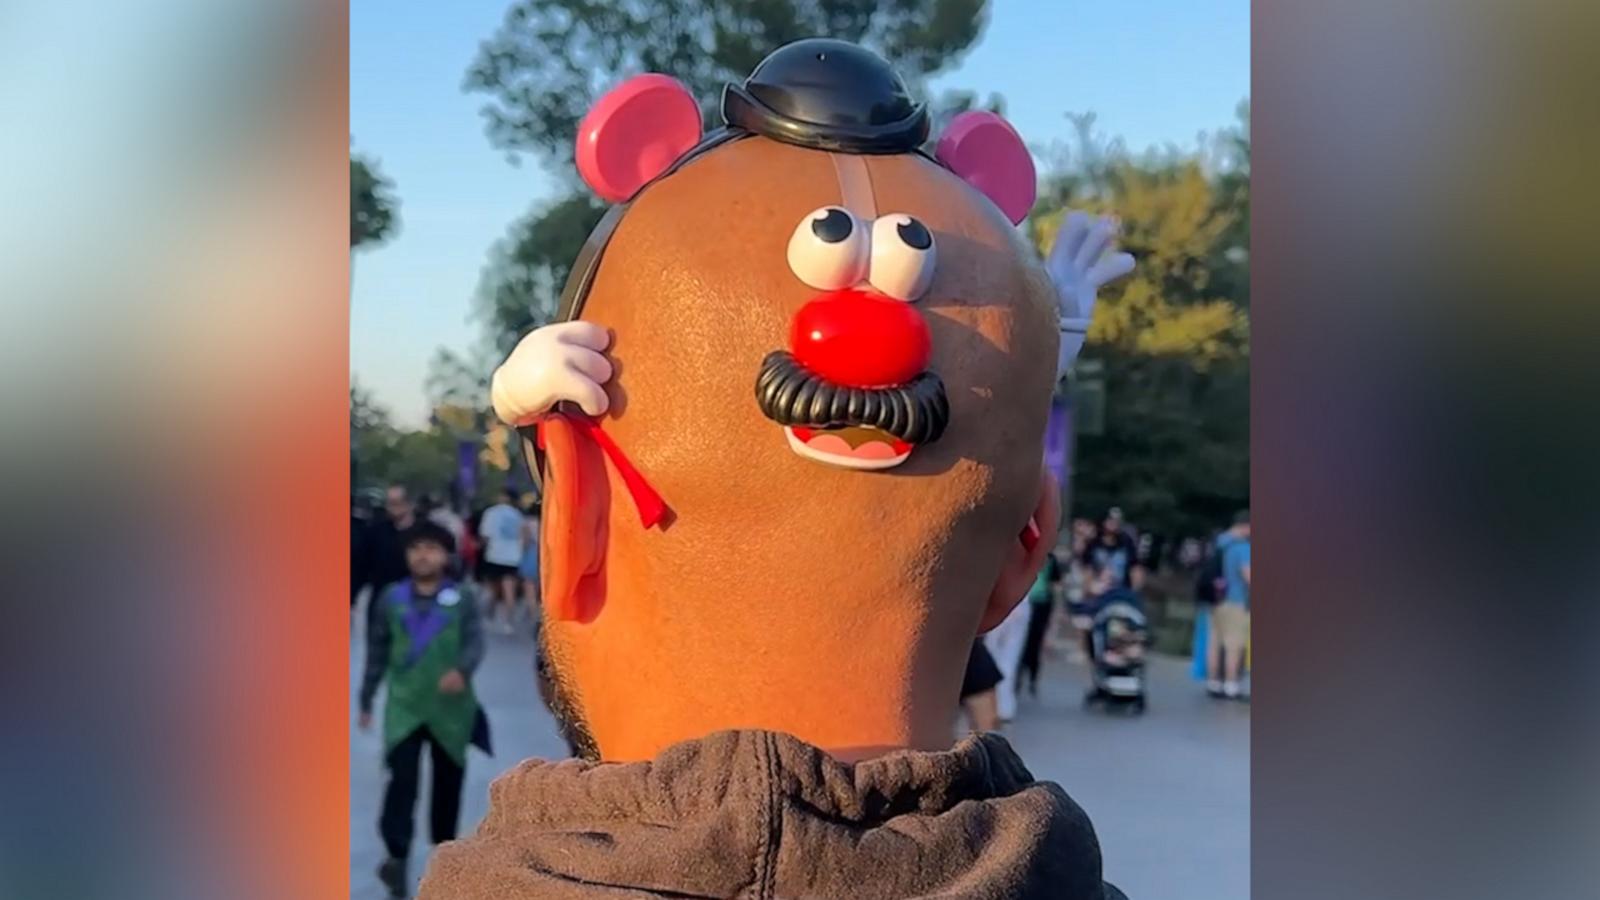 VIDEO: Hilariously brilliant Mr. Potato Head headpiece gets best reactions at Disney